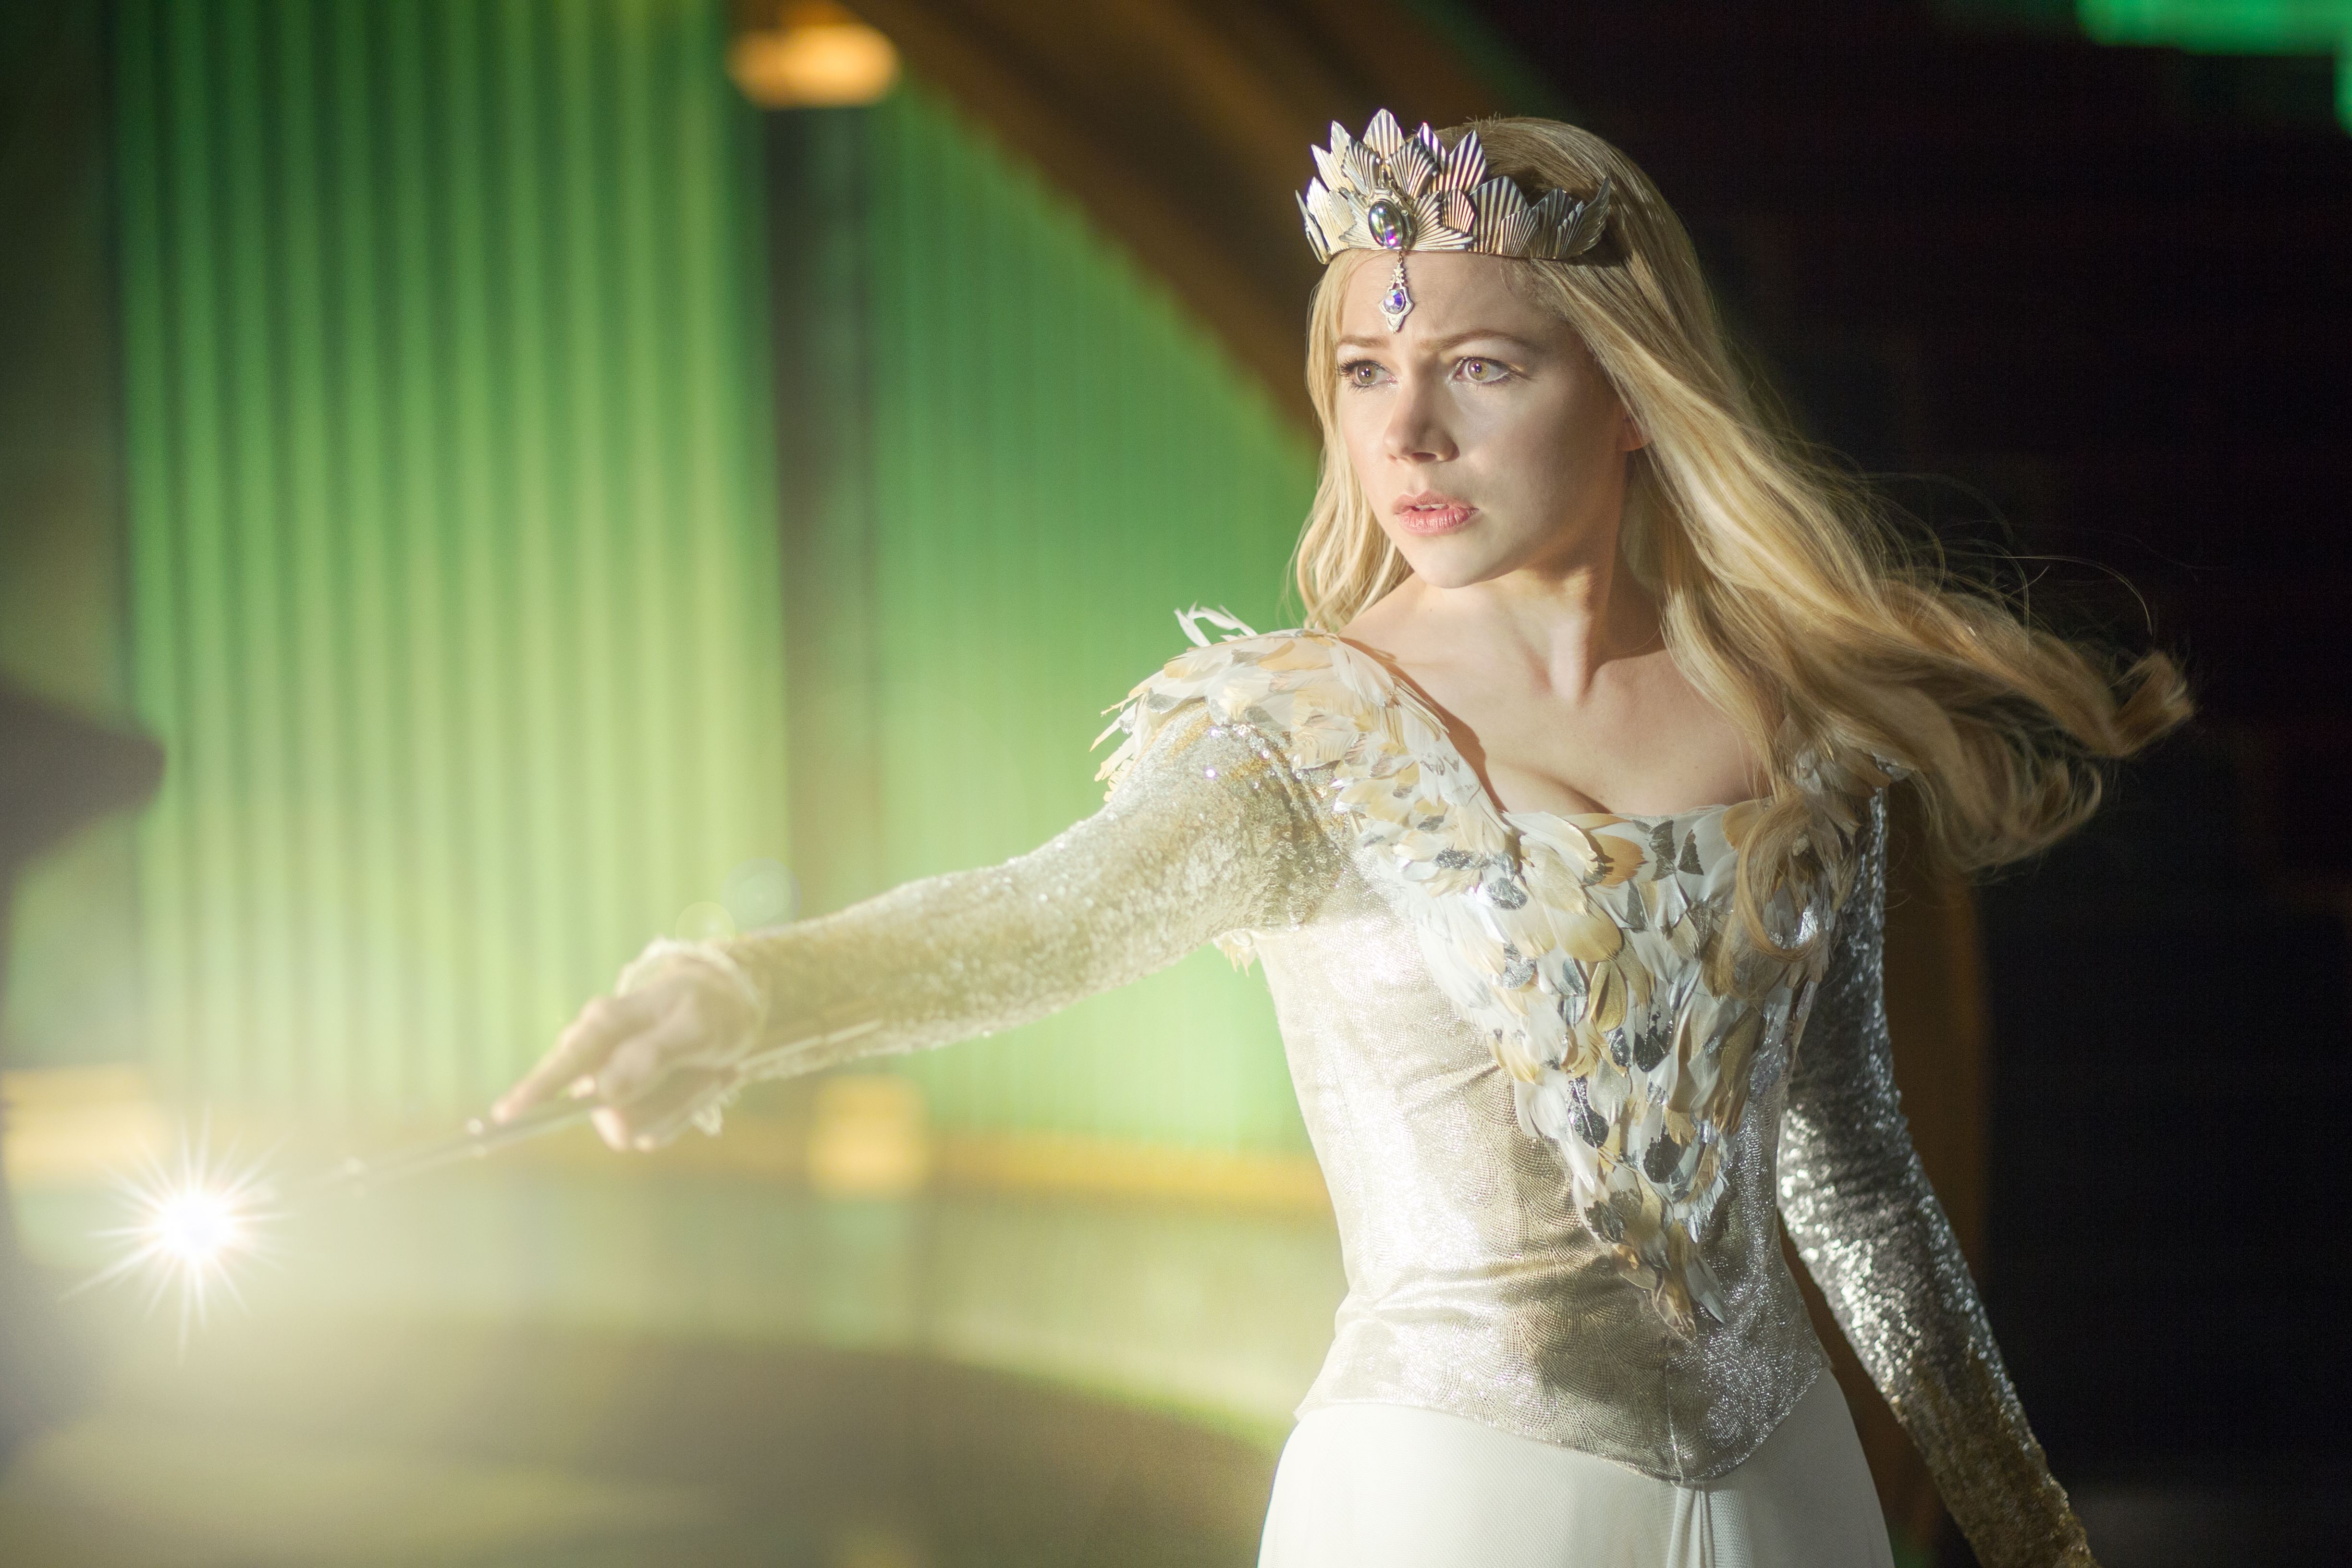 Glinda the Good Witch in Oz the Great and Powerful